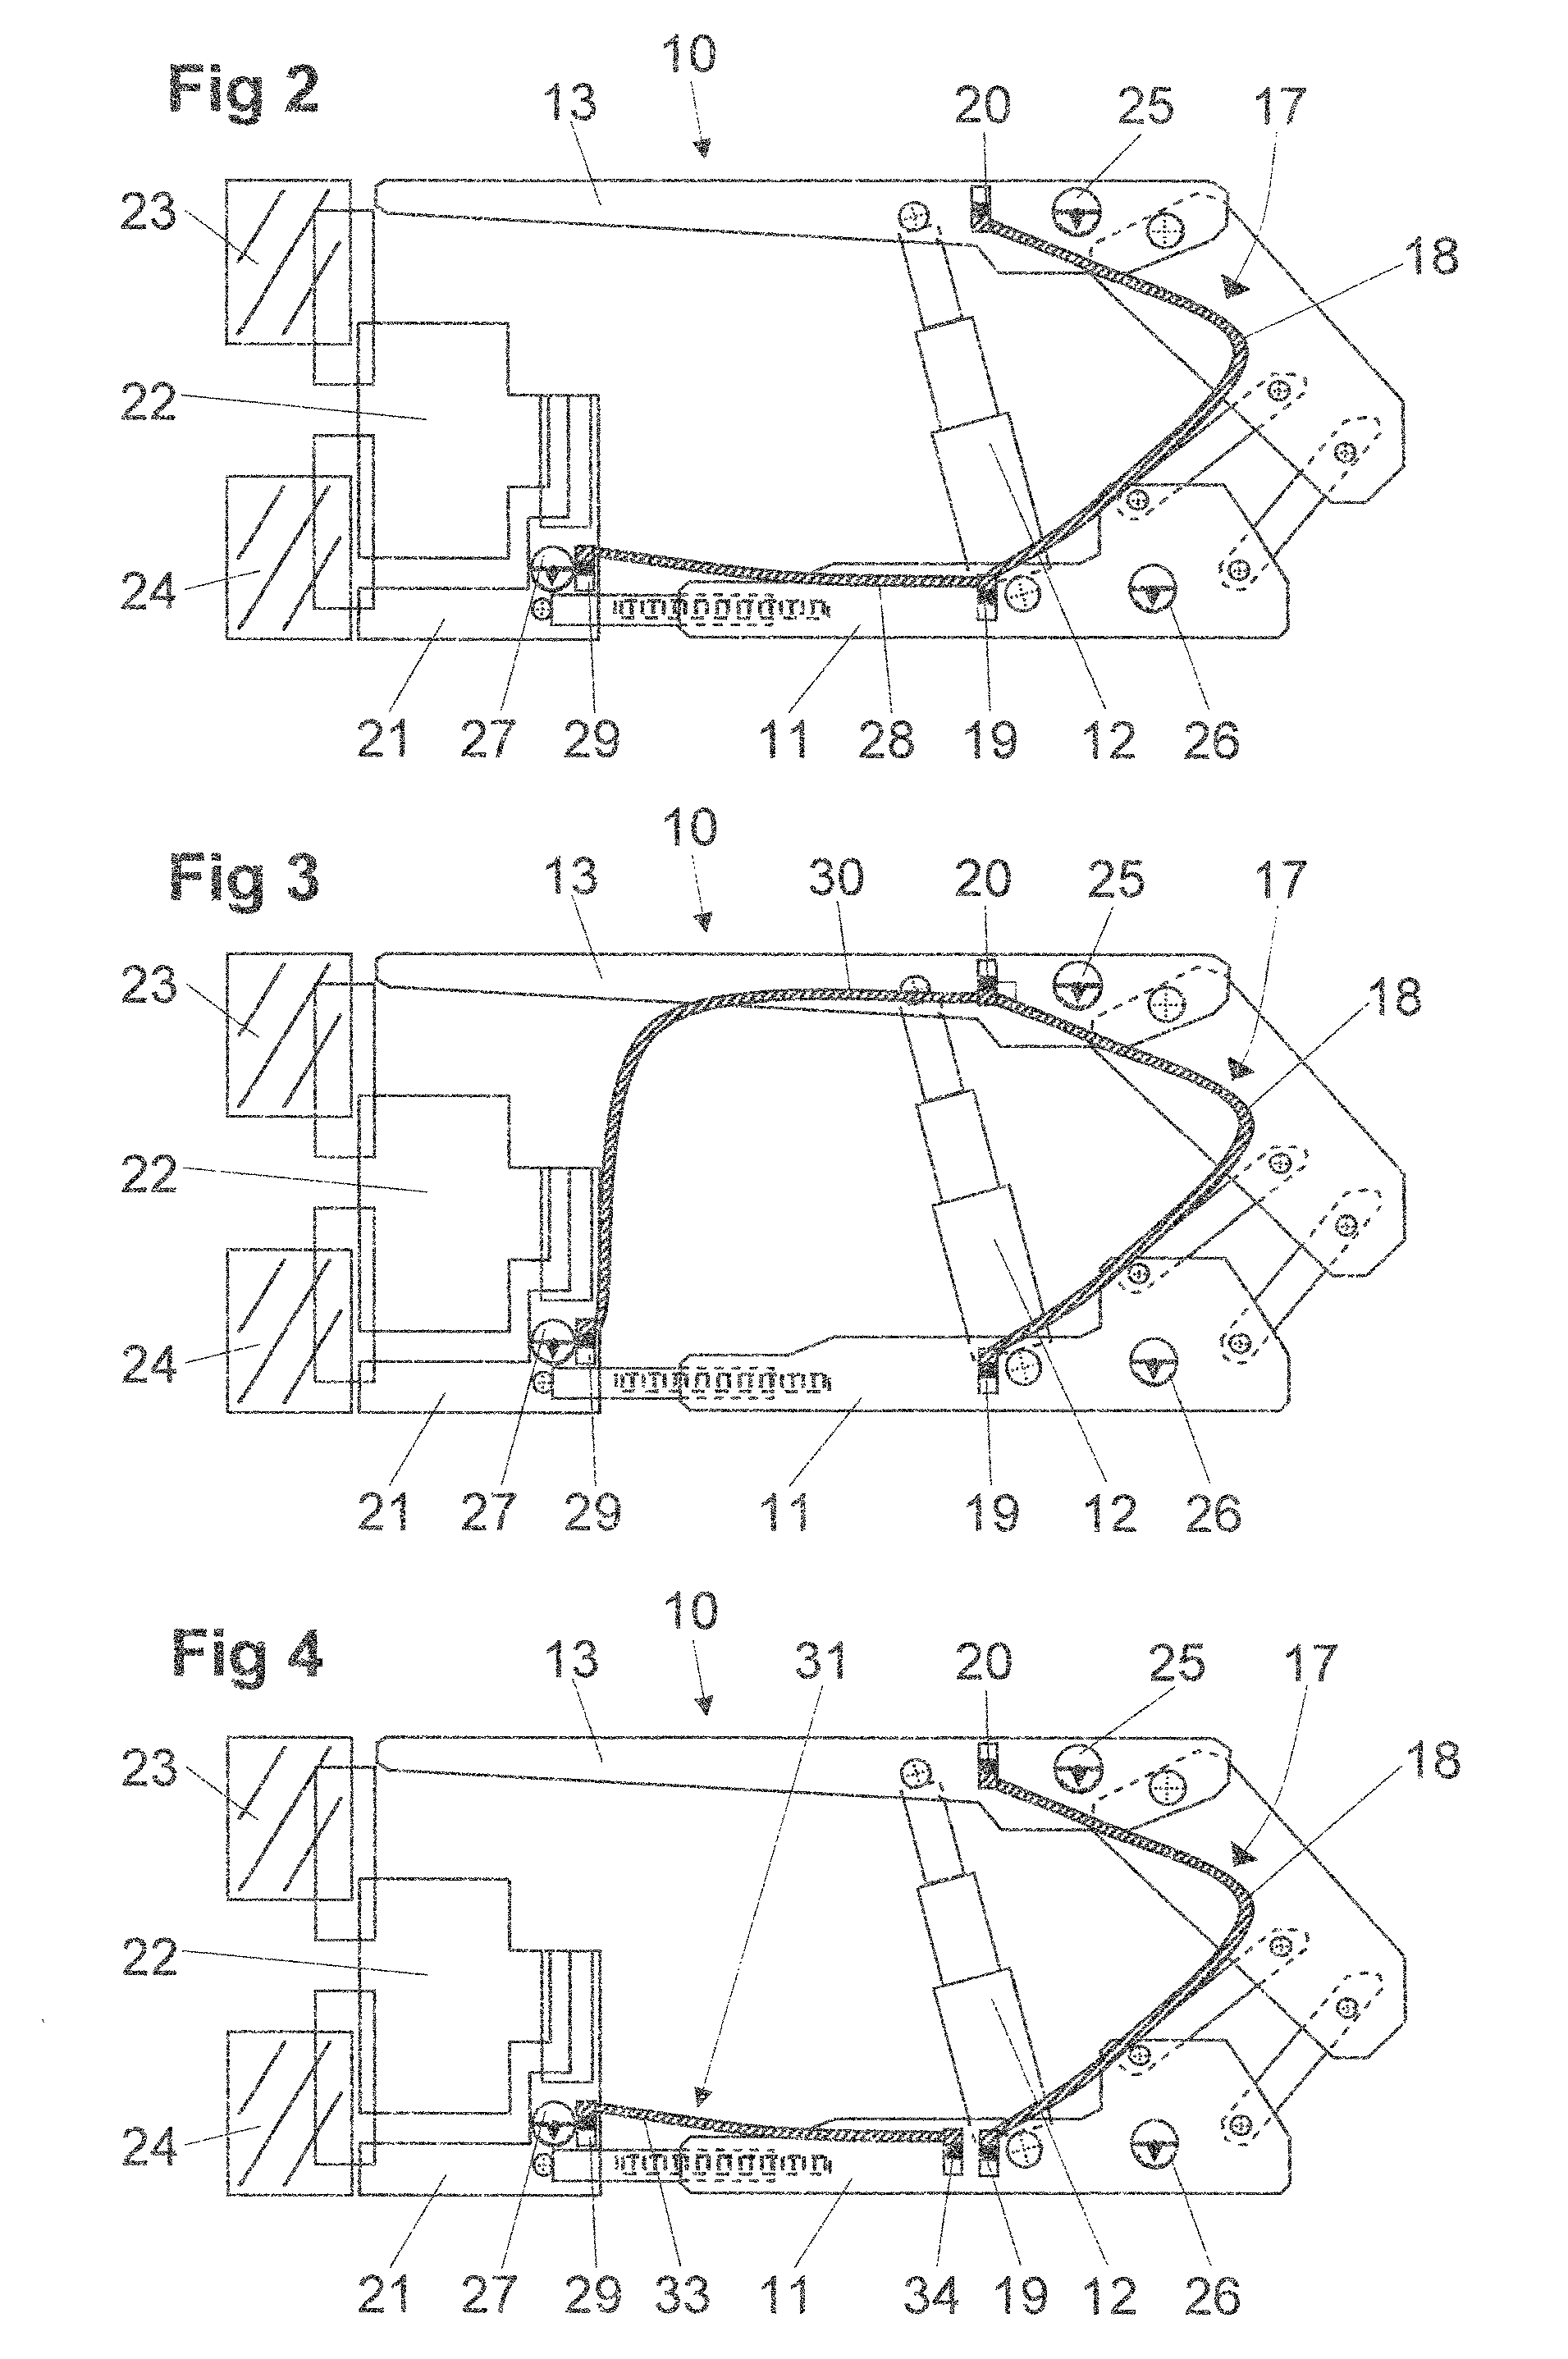 Face equipment comprising hose levels placed on the shield support frames of said face equipment